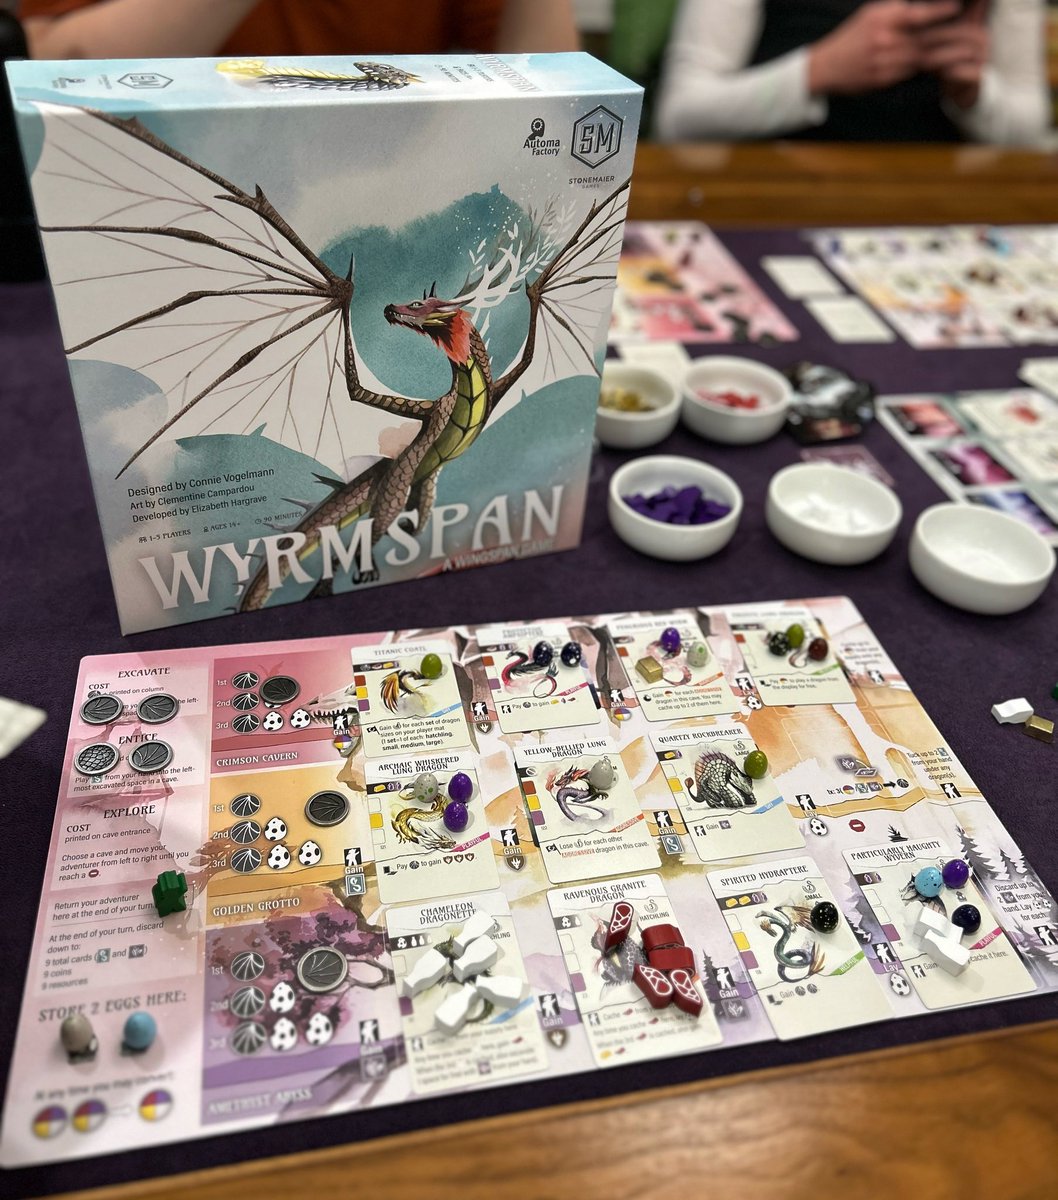 Wyrmspan by @ConnieVDC and @stonemaiergames last night! Definitely a different game from Wingspan, but fans will find the feel and flow familiar while the coin action system increases decision space. Plus DRAGONS! The hatchlings are so adorable. Super enjoyed, want to play again!